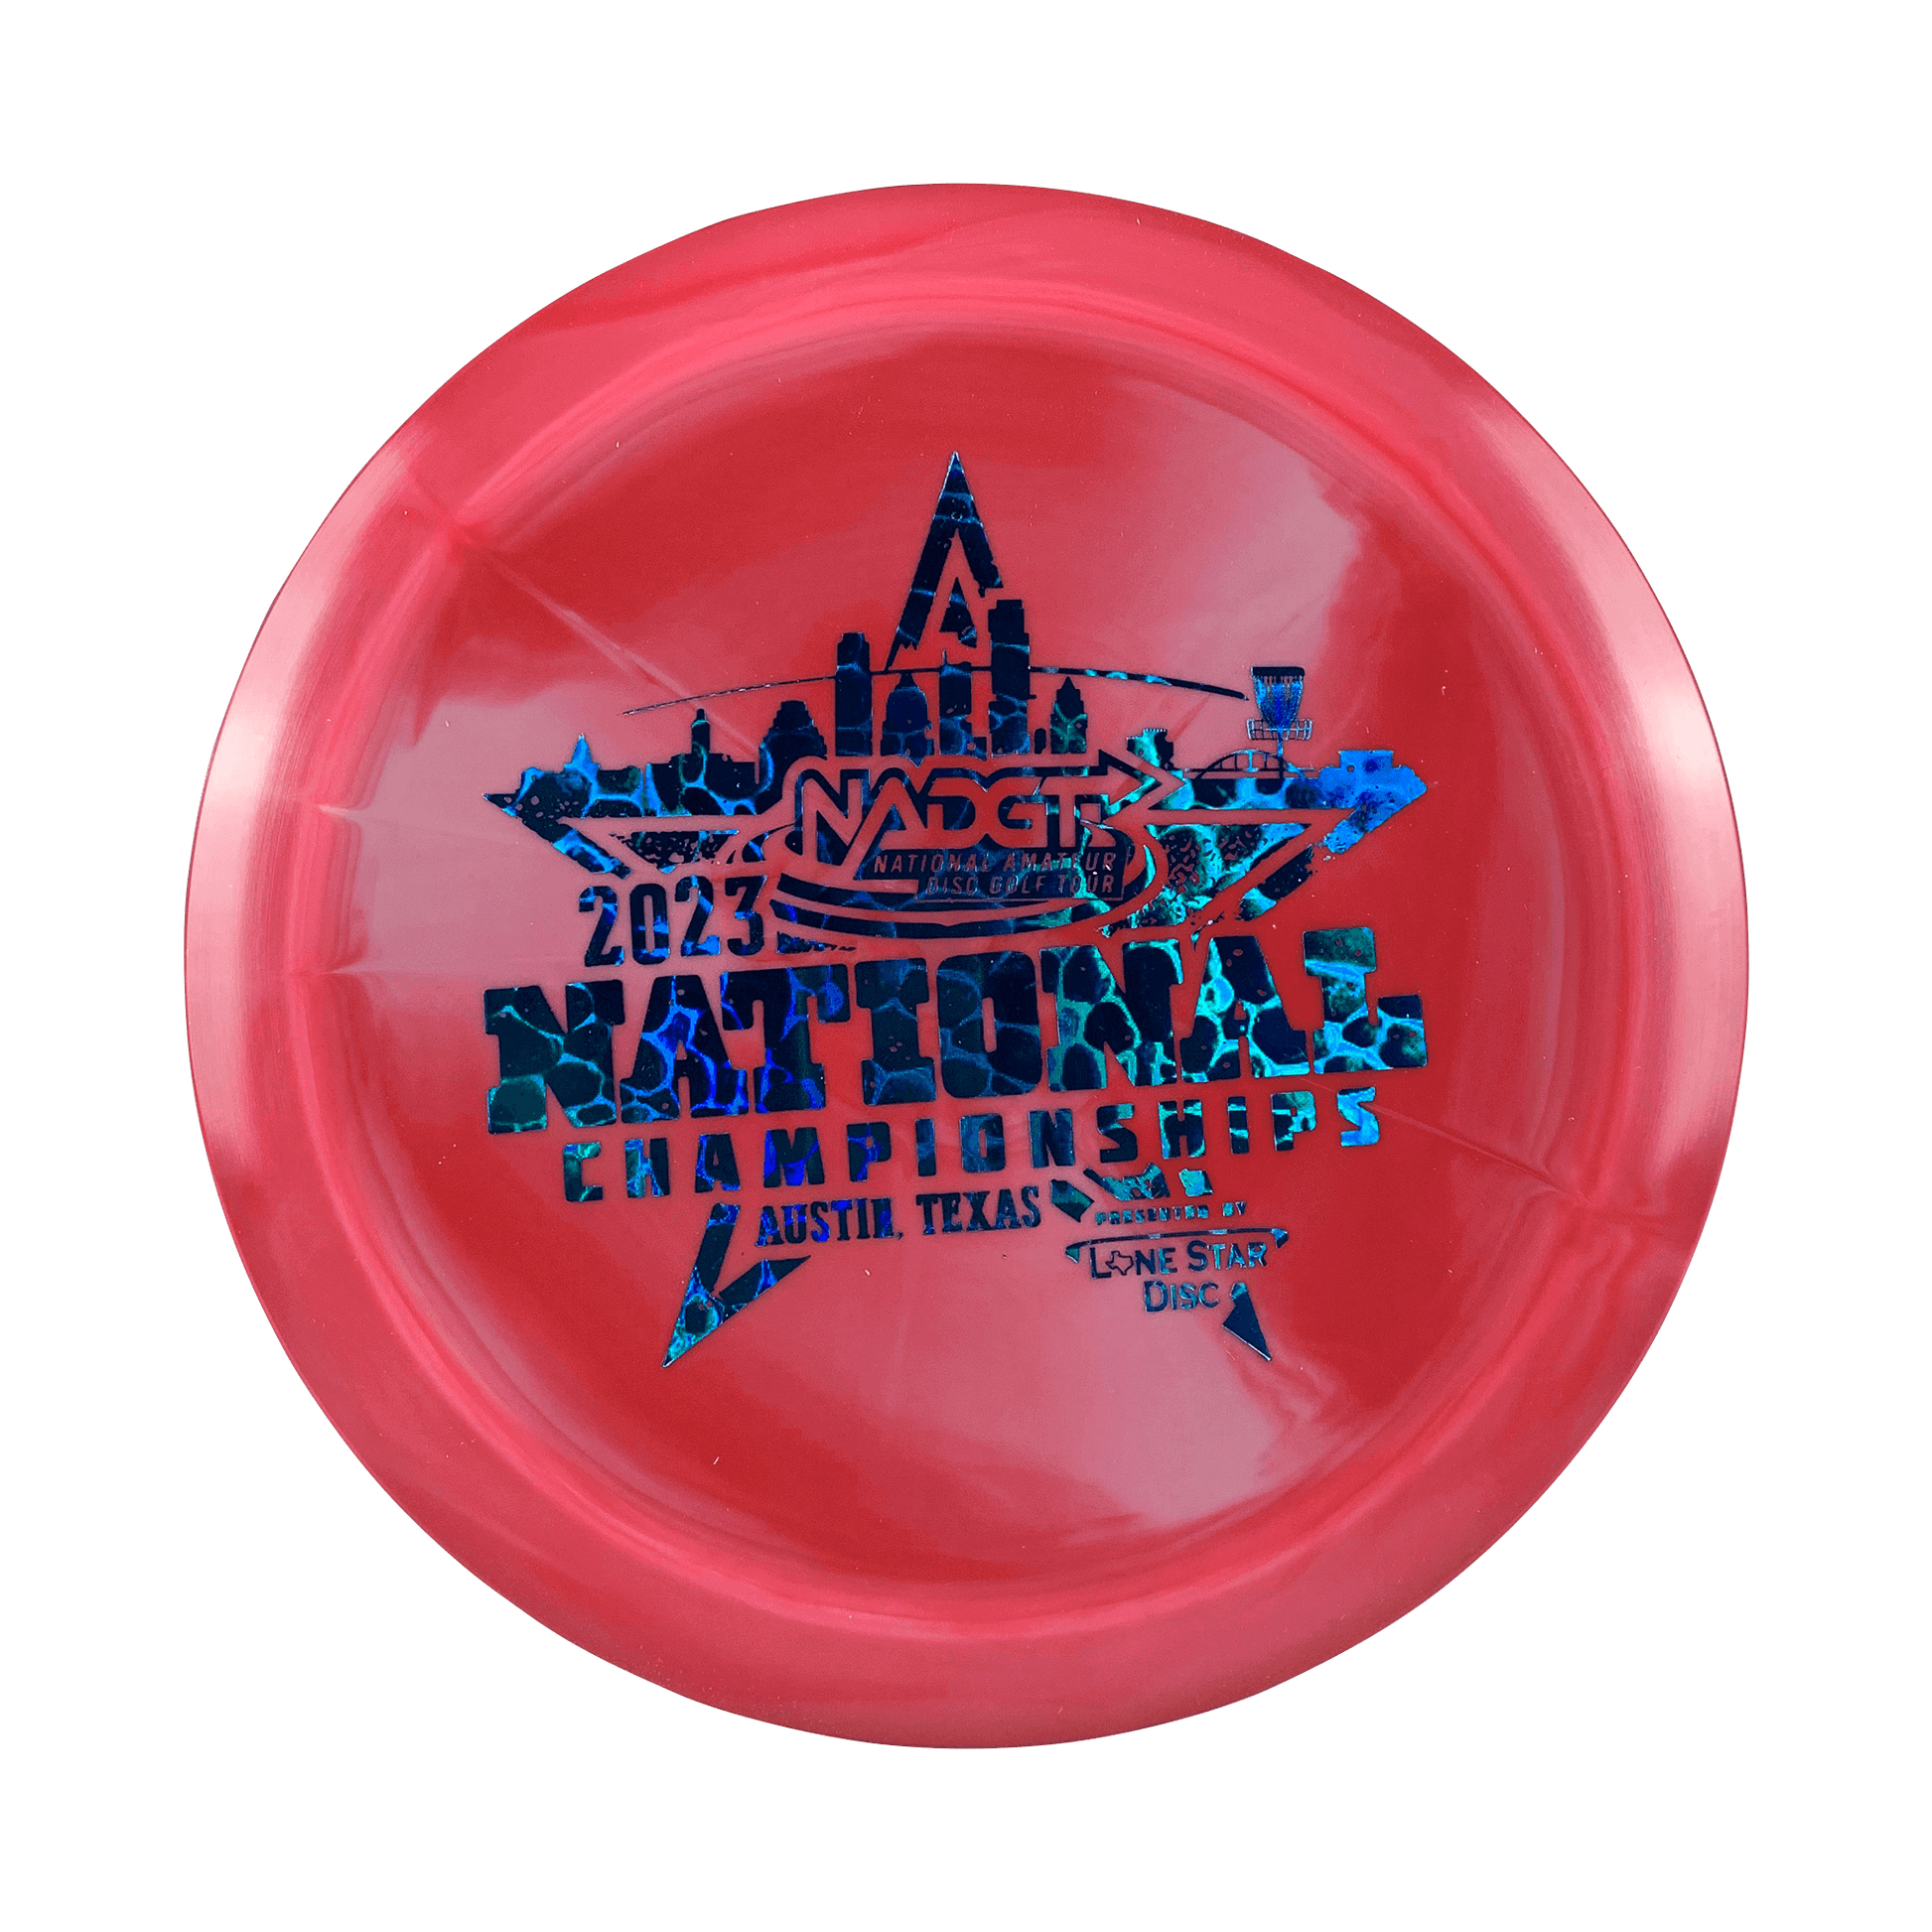 Alpha Tombstone - NADGT National Championship 2023 Disc Lonestar Disc multi / red 173 